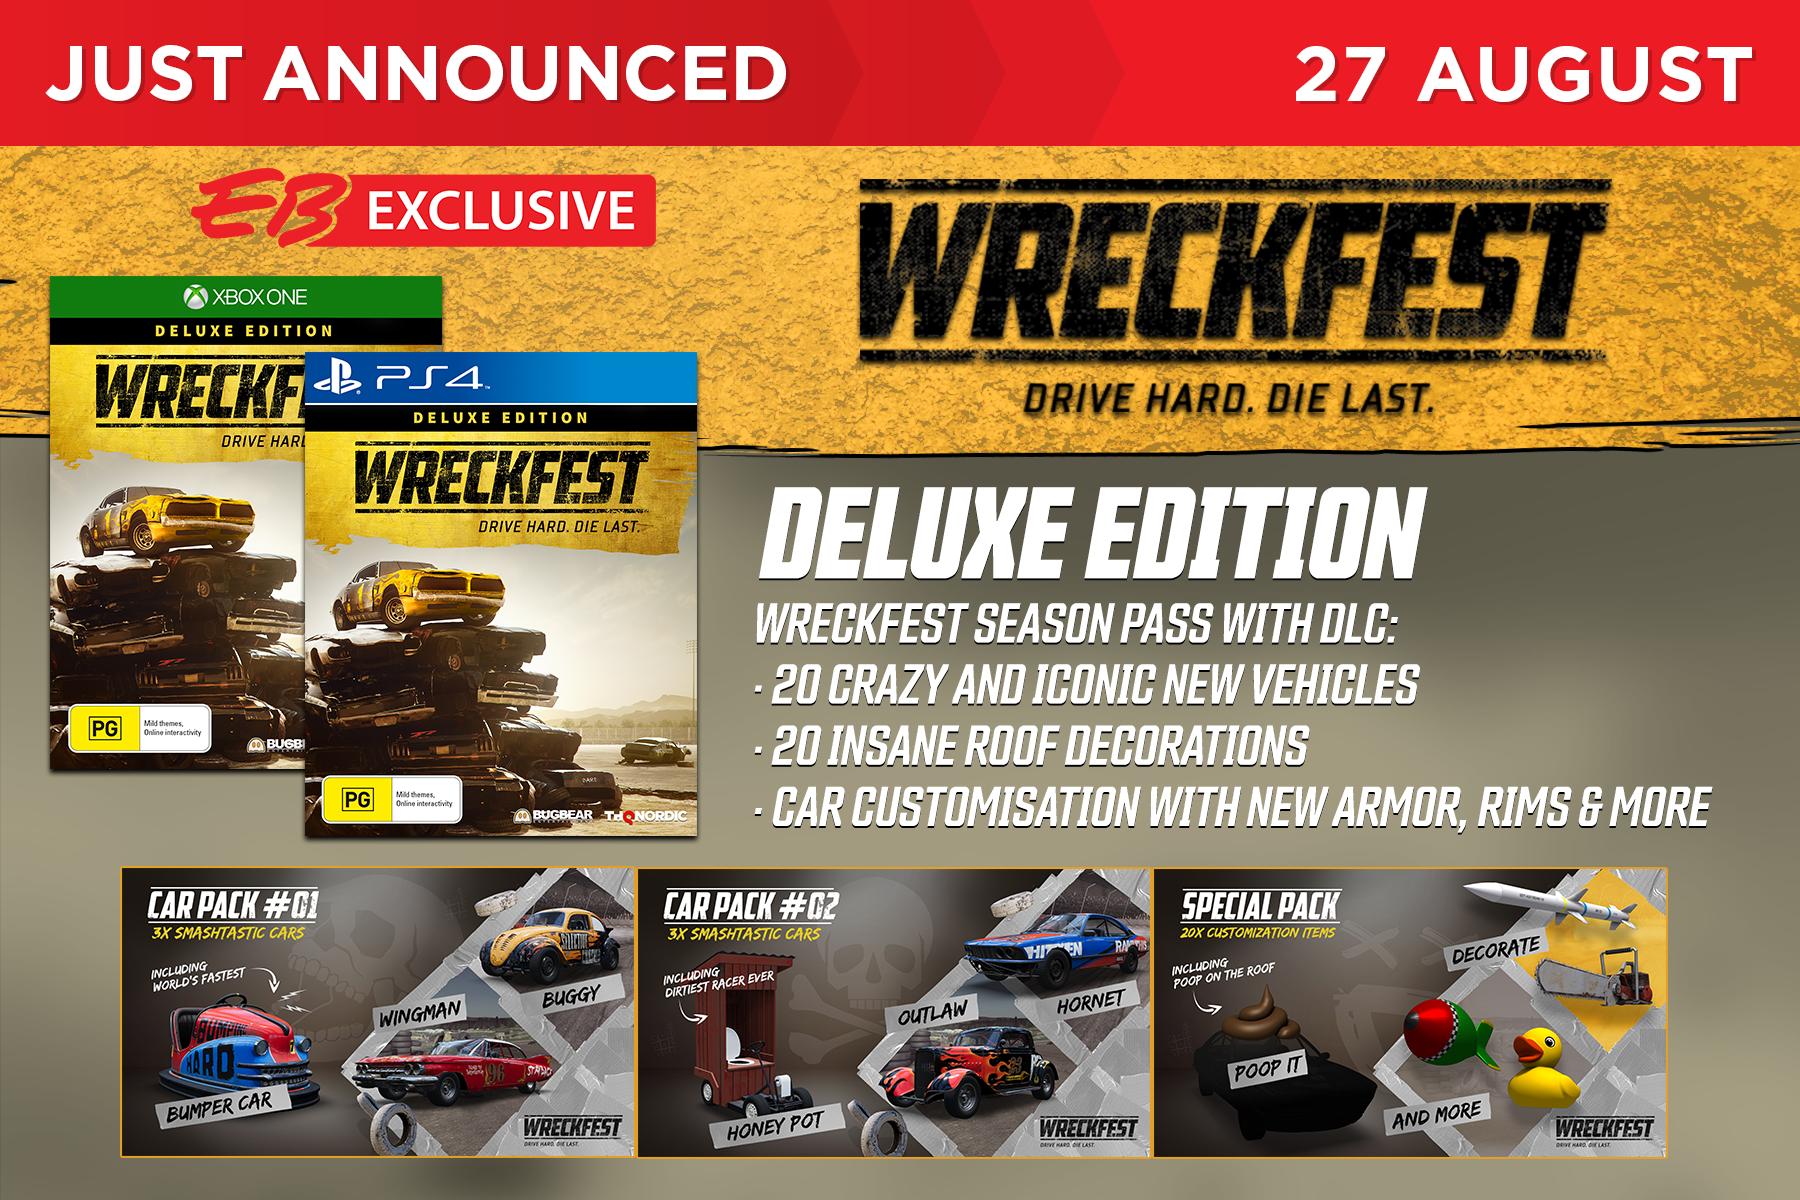 EB Games Australia on Twitter: "Just Preorder the EB Exclusive Wreckfest Deluxe Edition coming 27 August! 💥🚗 Drive Hard. Die Last. https://t.co/joJ7BpxynI https://t.co/lrCsizvj0t" / Twitter